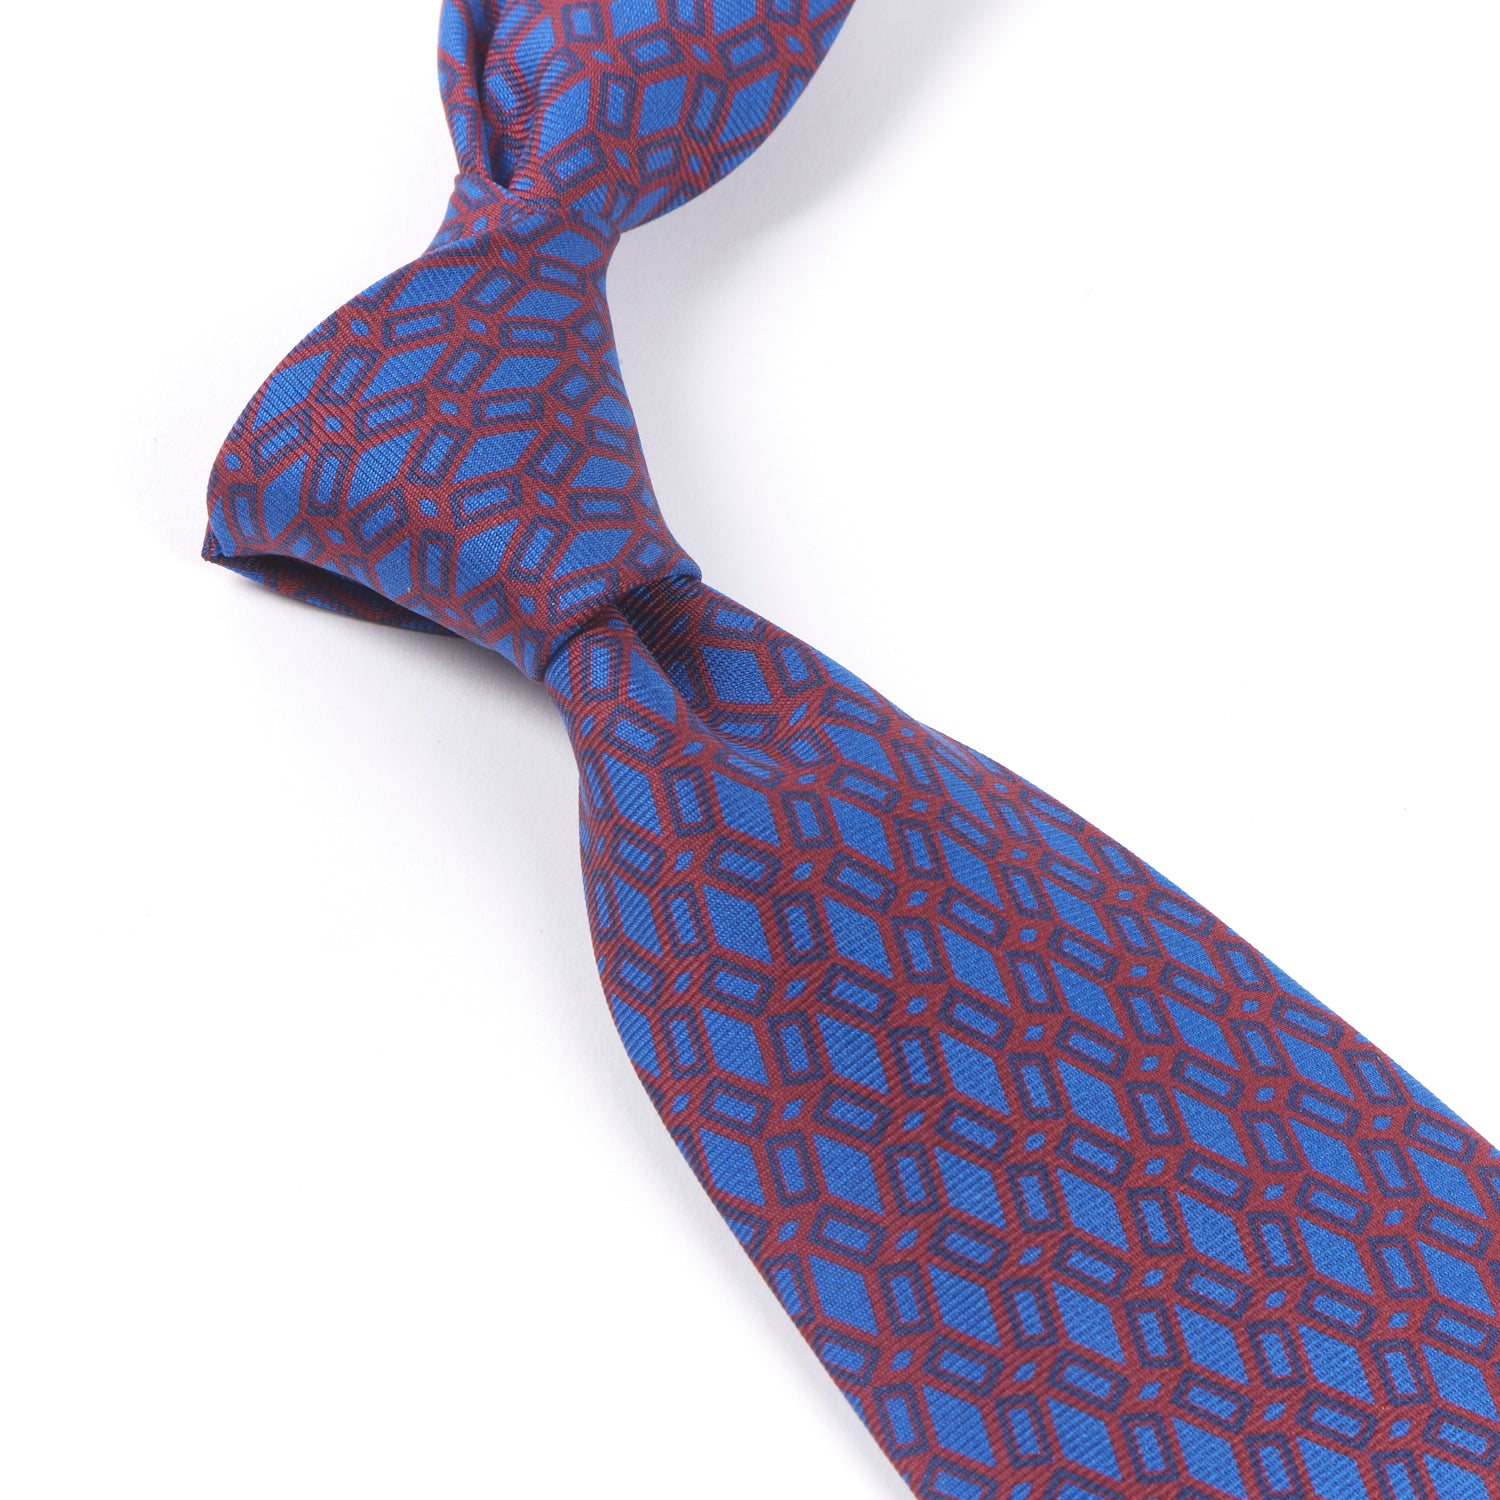 Handmade British Sovereign Grade Rust Ancient Madder Tie, 150cm with a geometric pattern in blue and red by KirbyAllison.com.